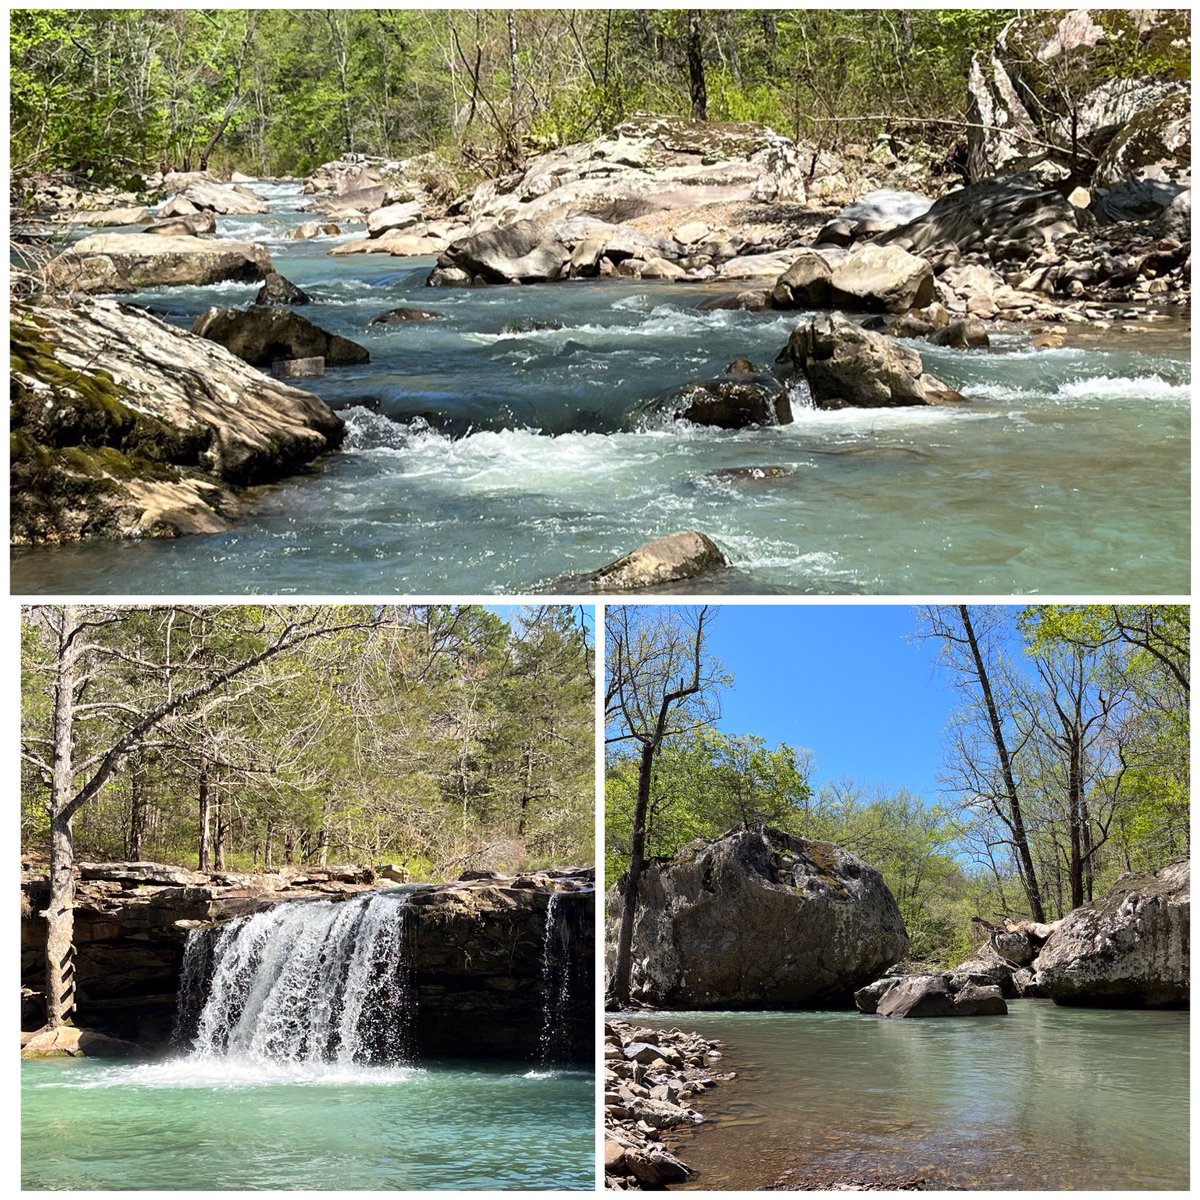 Spent the weekend hiking and camping. Beautiful place and will def go on my list of places to revisit when I can stay longer. #NaturalState #Arkansas 🏕️❤️